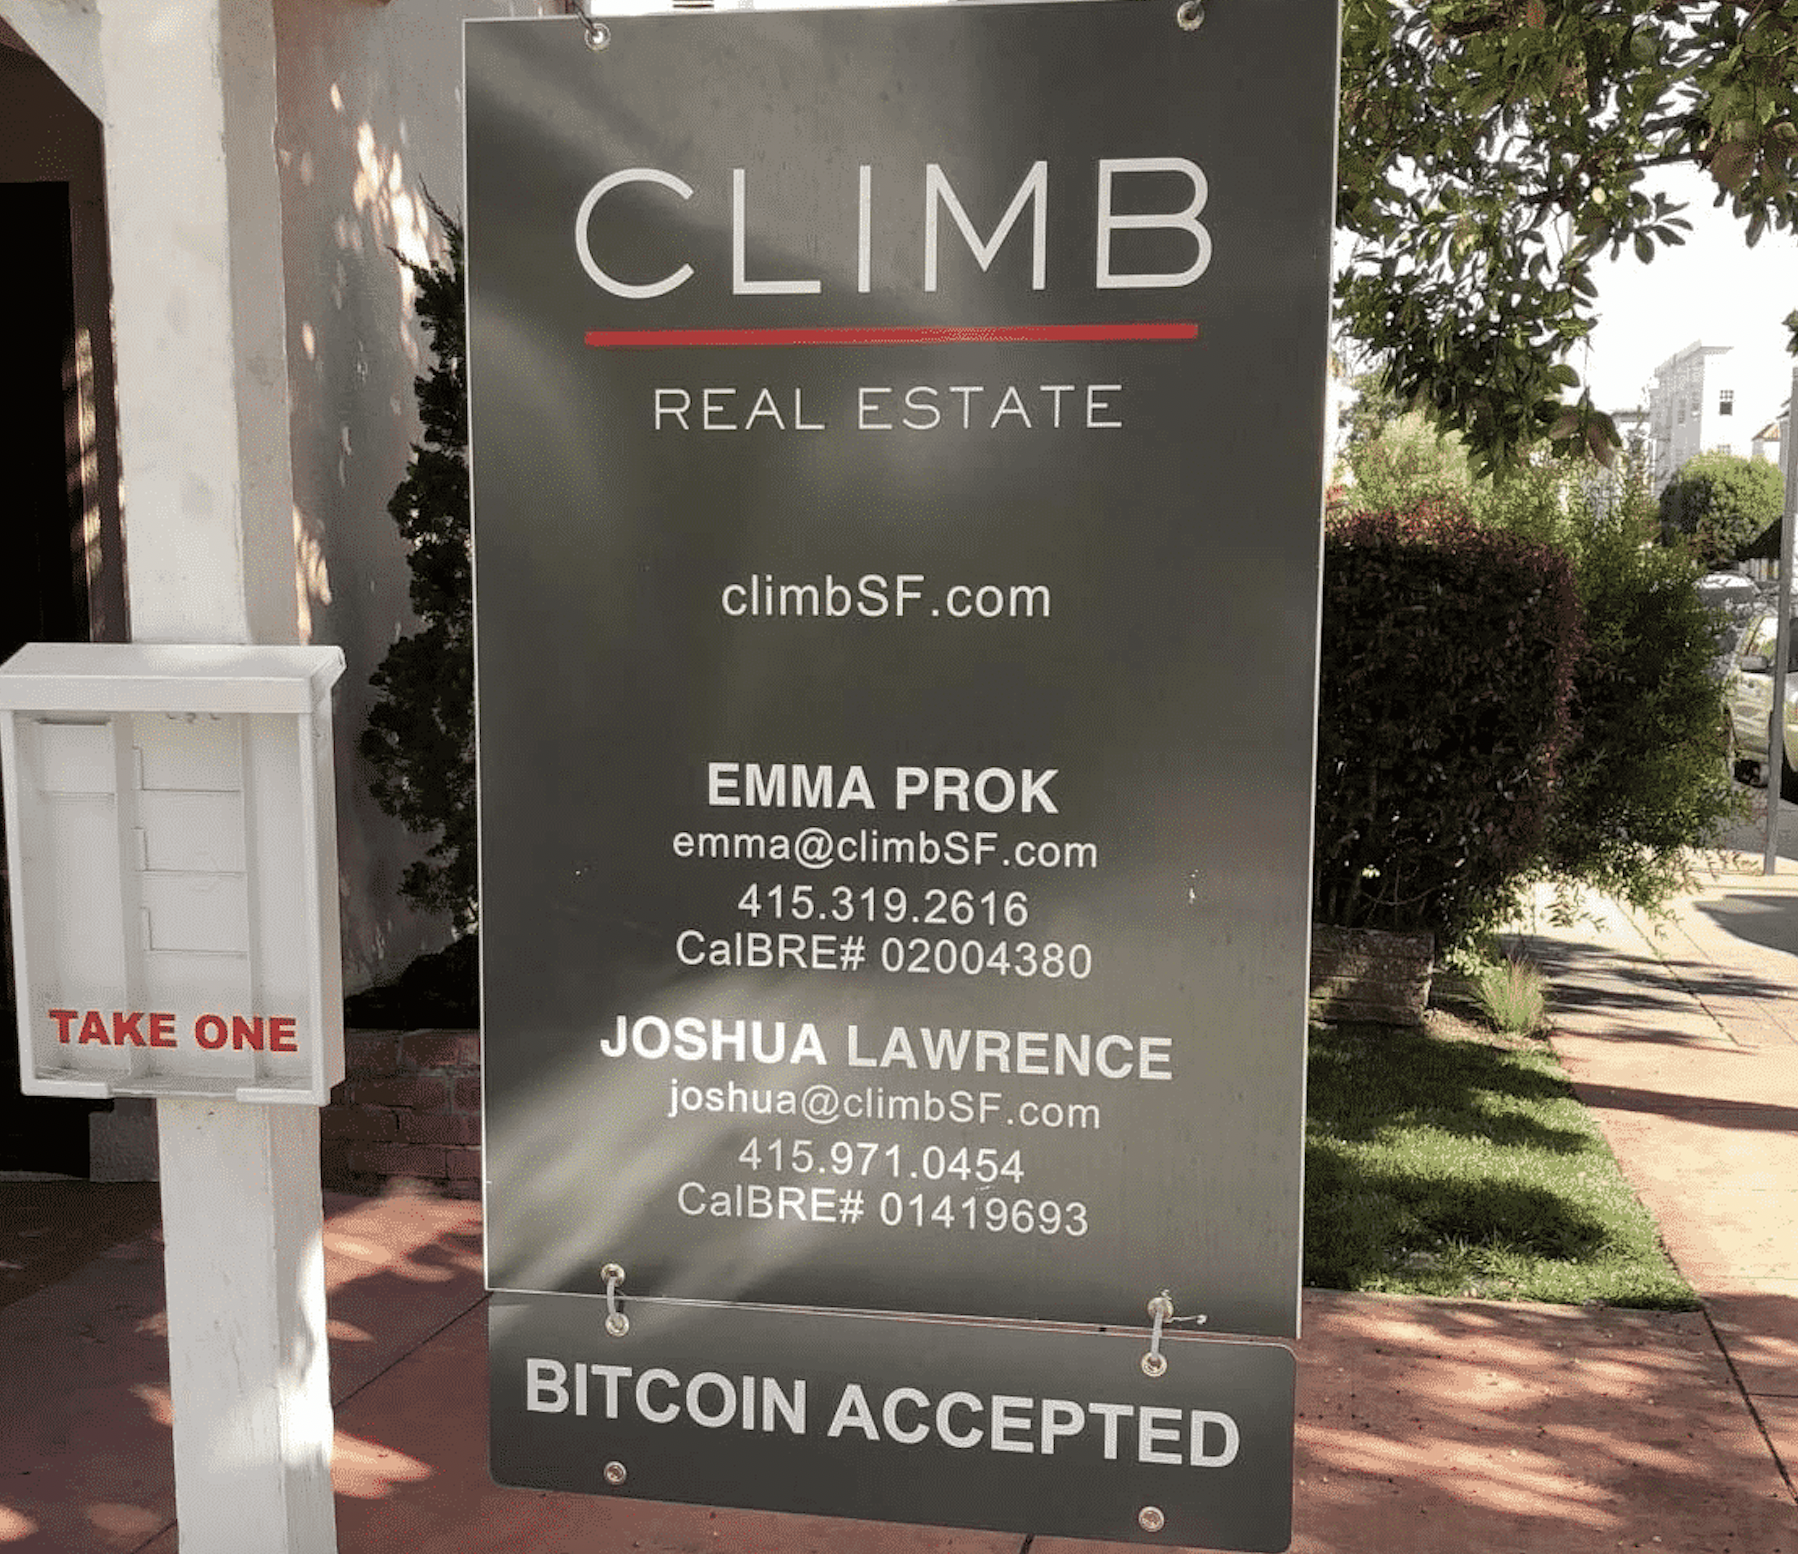 advertising-blockchain-technology-like-Bitcoin-on-a-yard-sign.png